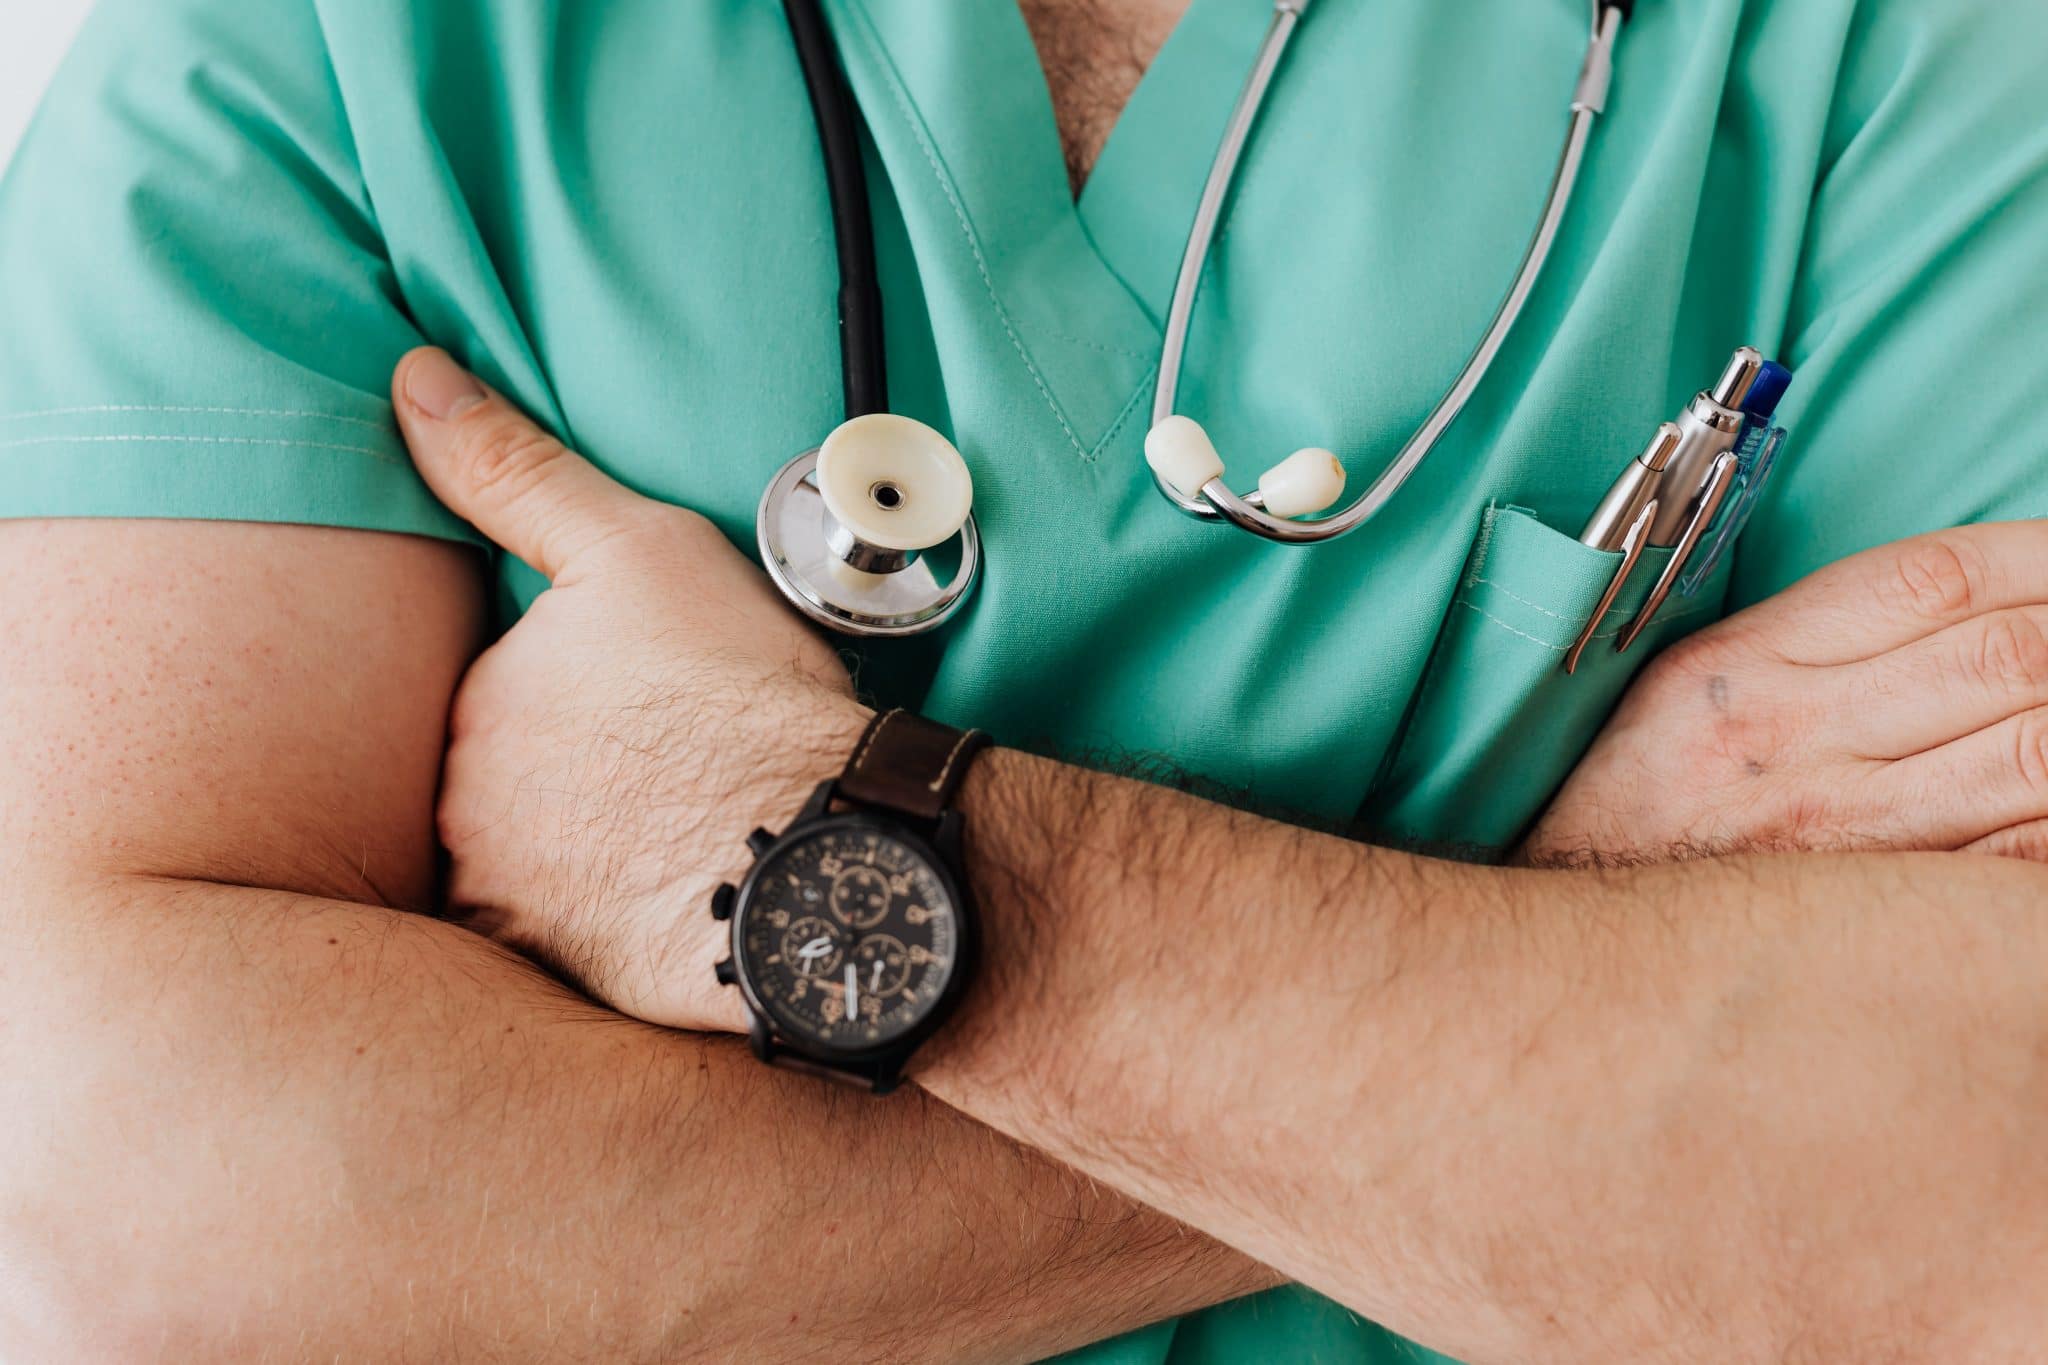 You can request a one-time change in doctor in your workers' comp case.